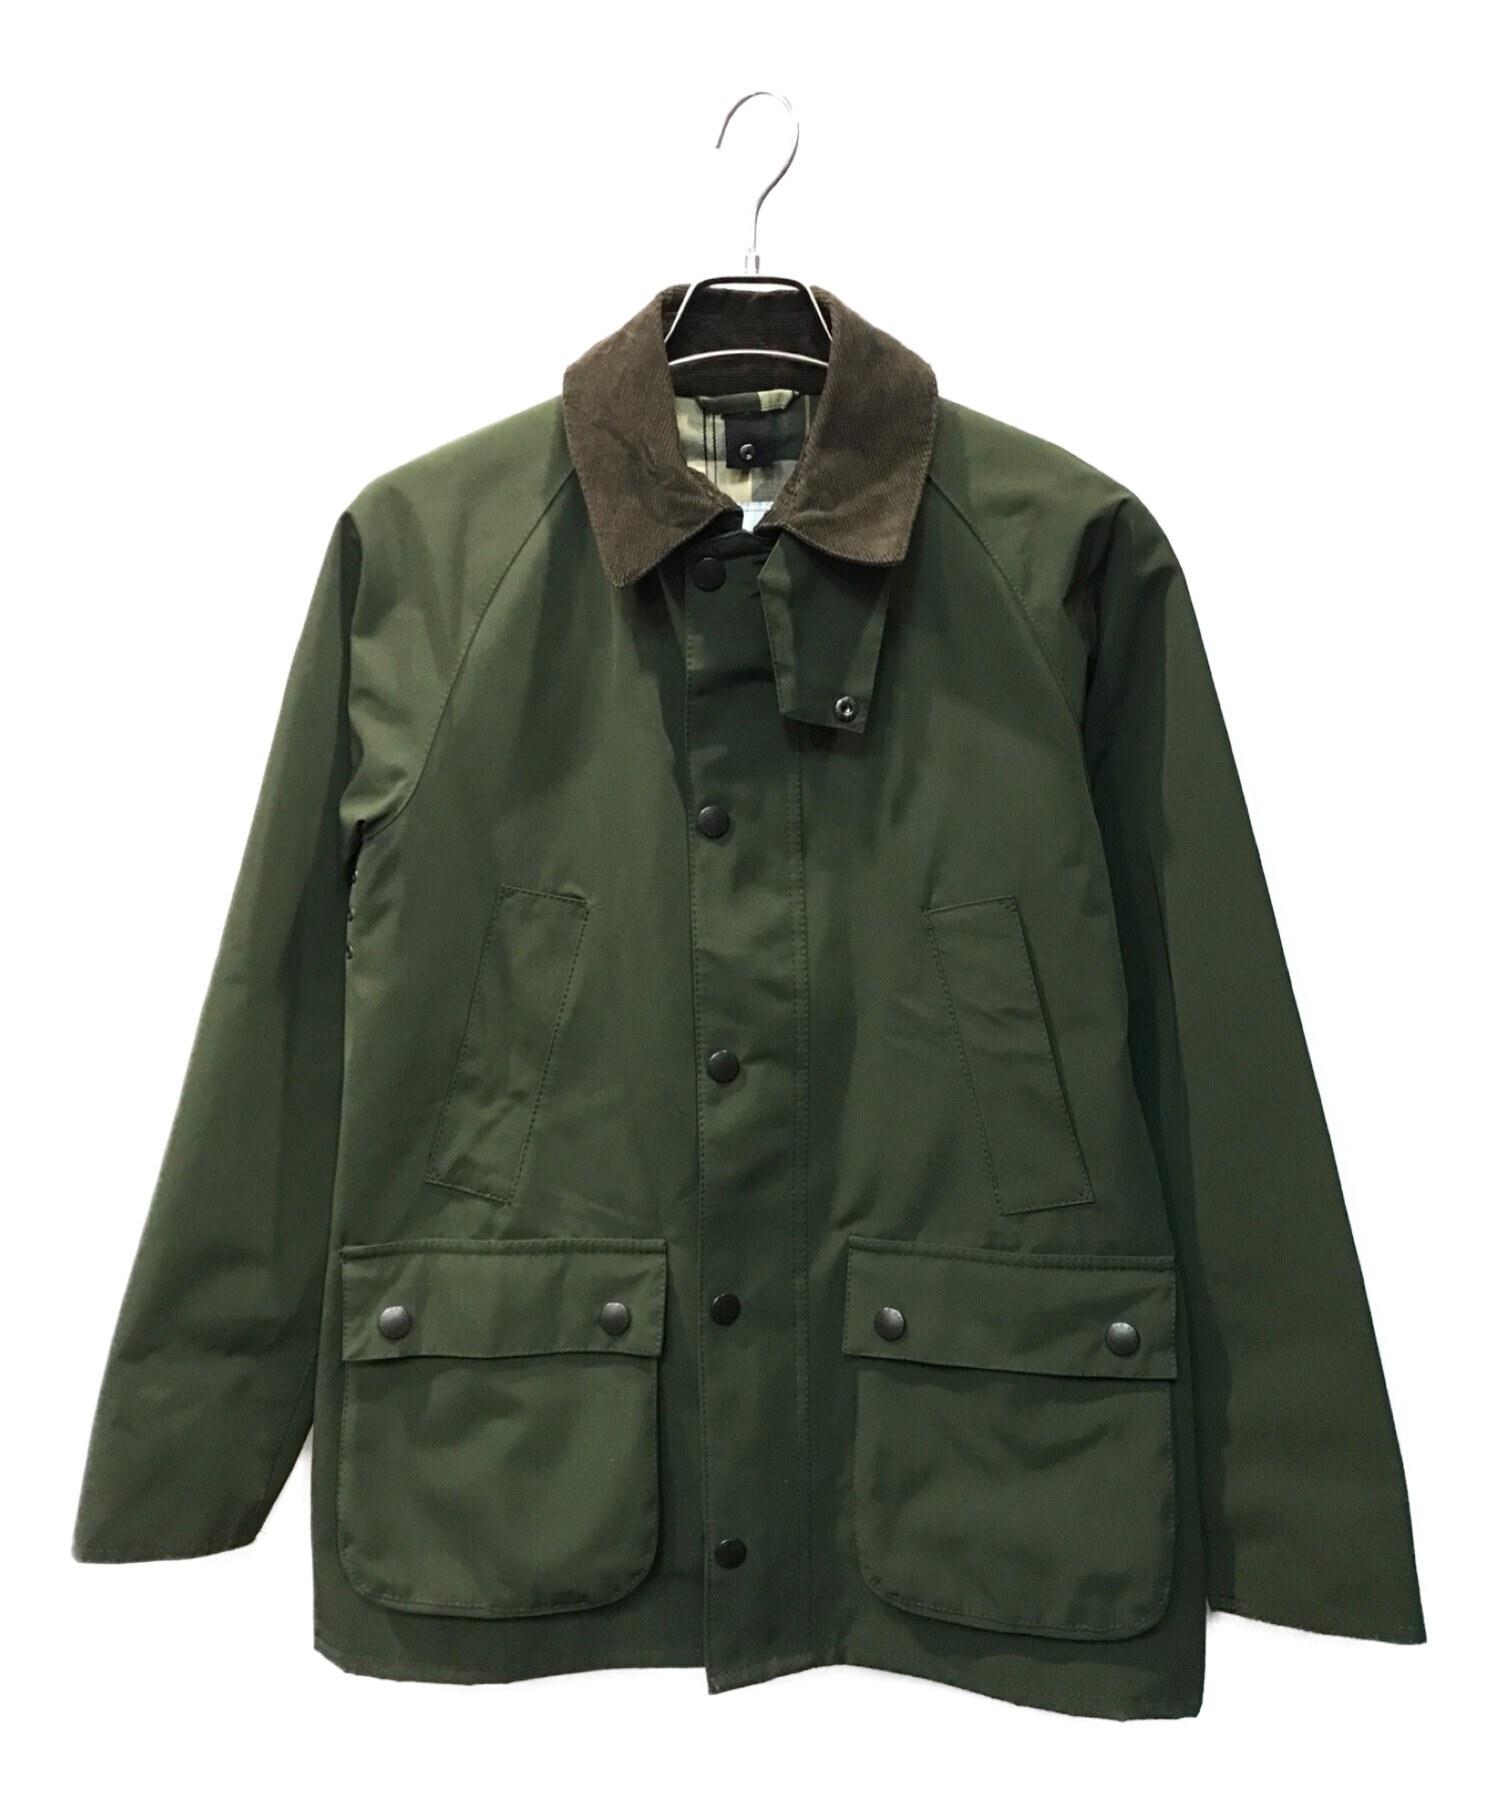 Barbour BEDALE SL(POLYESTER)   サイズ36ポリエステル100%